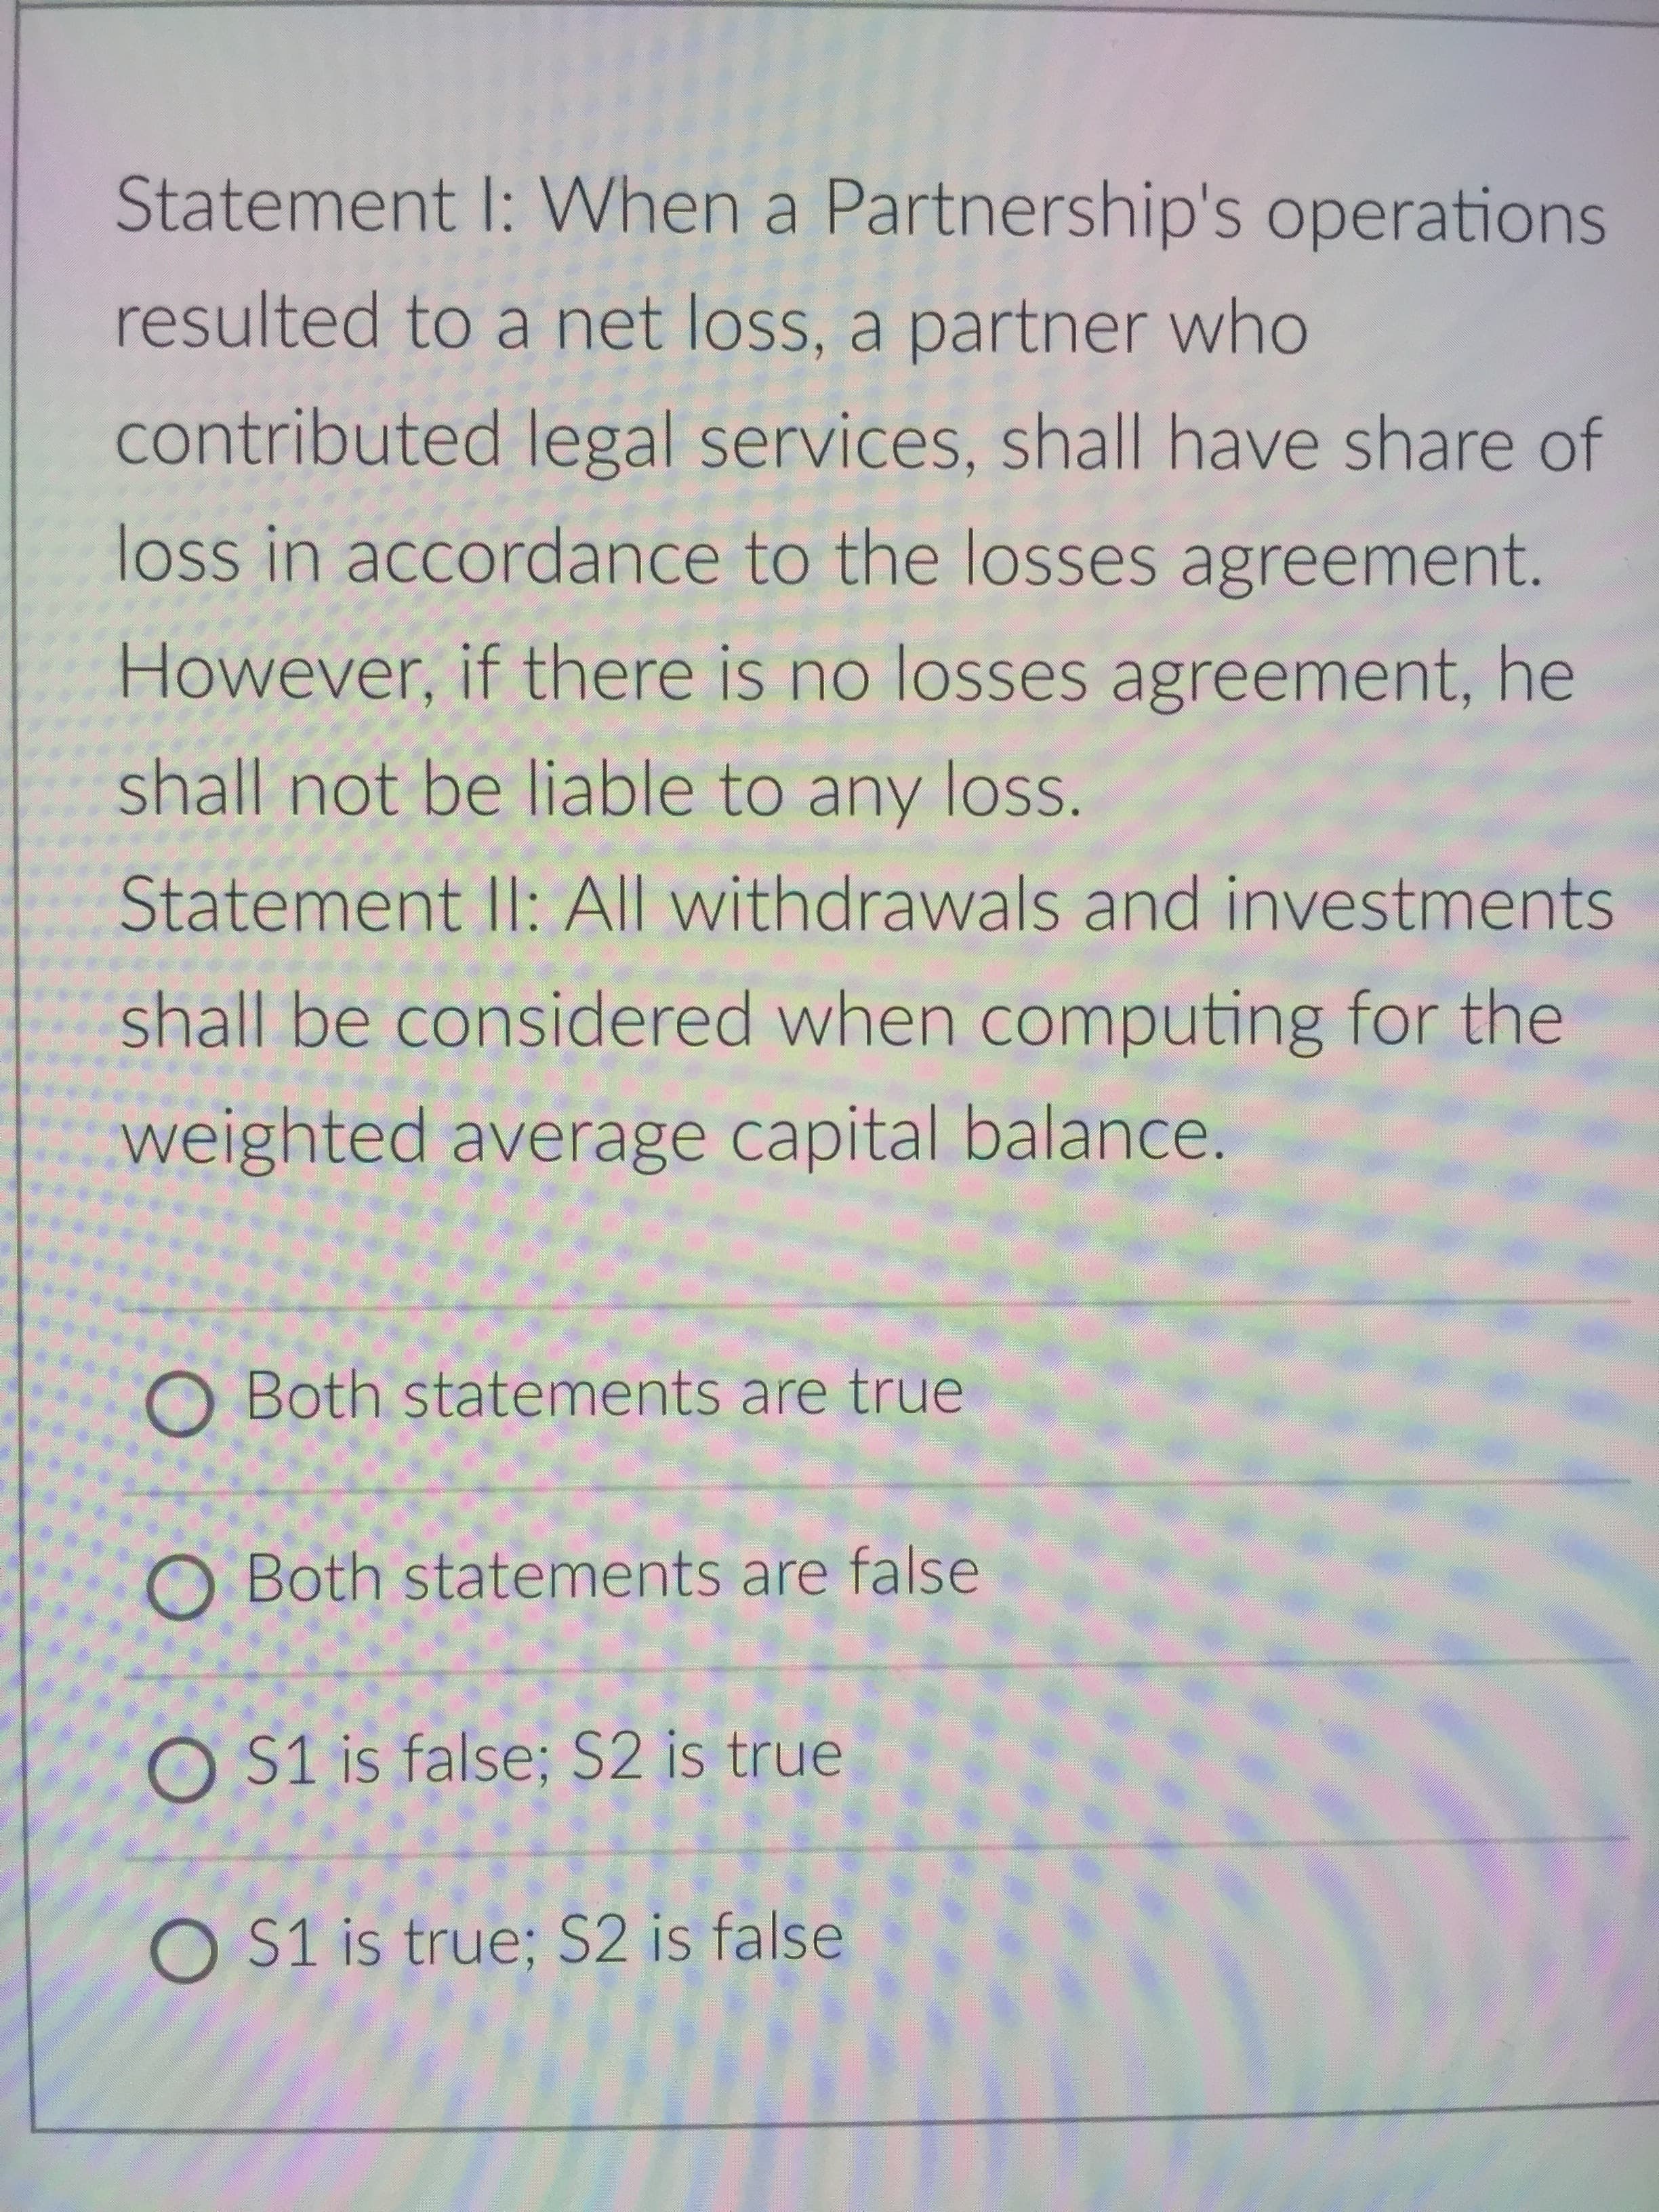 Statement I: When a Partnership's operations
resulted to a net loss, a partner who
contributed legal services, shall have share of
loss in accordance to the losses agreement.
However, if there is no losses agreement, he
shall not be liable to any loss.
Statement Il: All withdrawals and investments
shall be considered when computing for the
weighted average capital balance.
O Both statements are true
O Both statements are false
O S1 is false; S2 is true
O S1 is true; S2 is false
